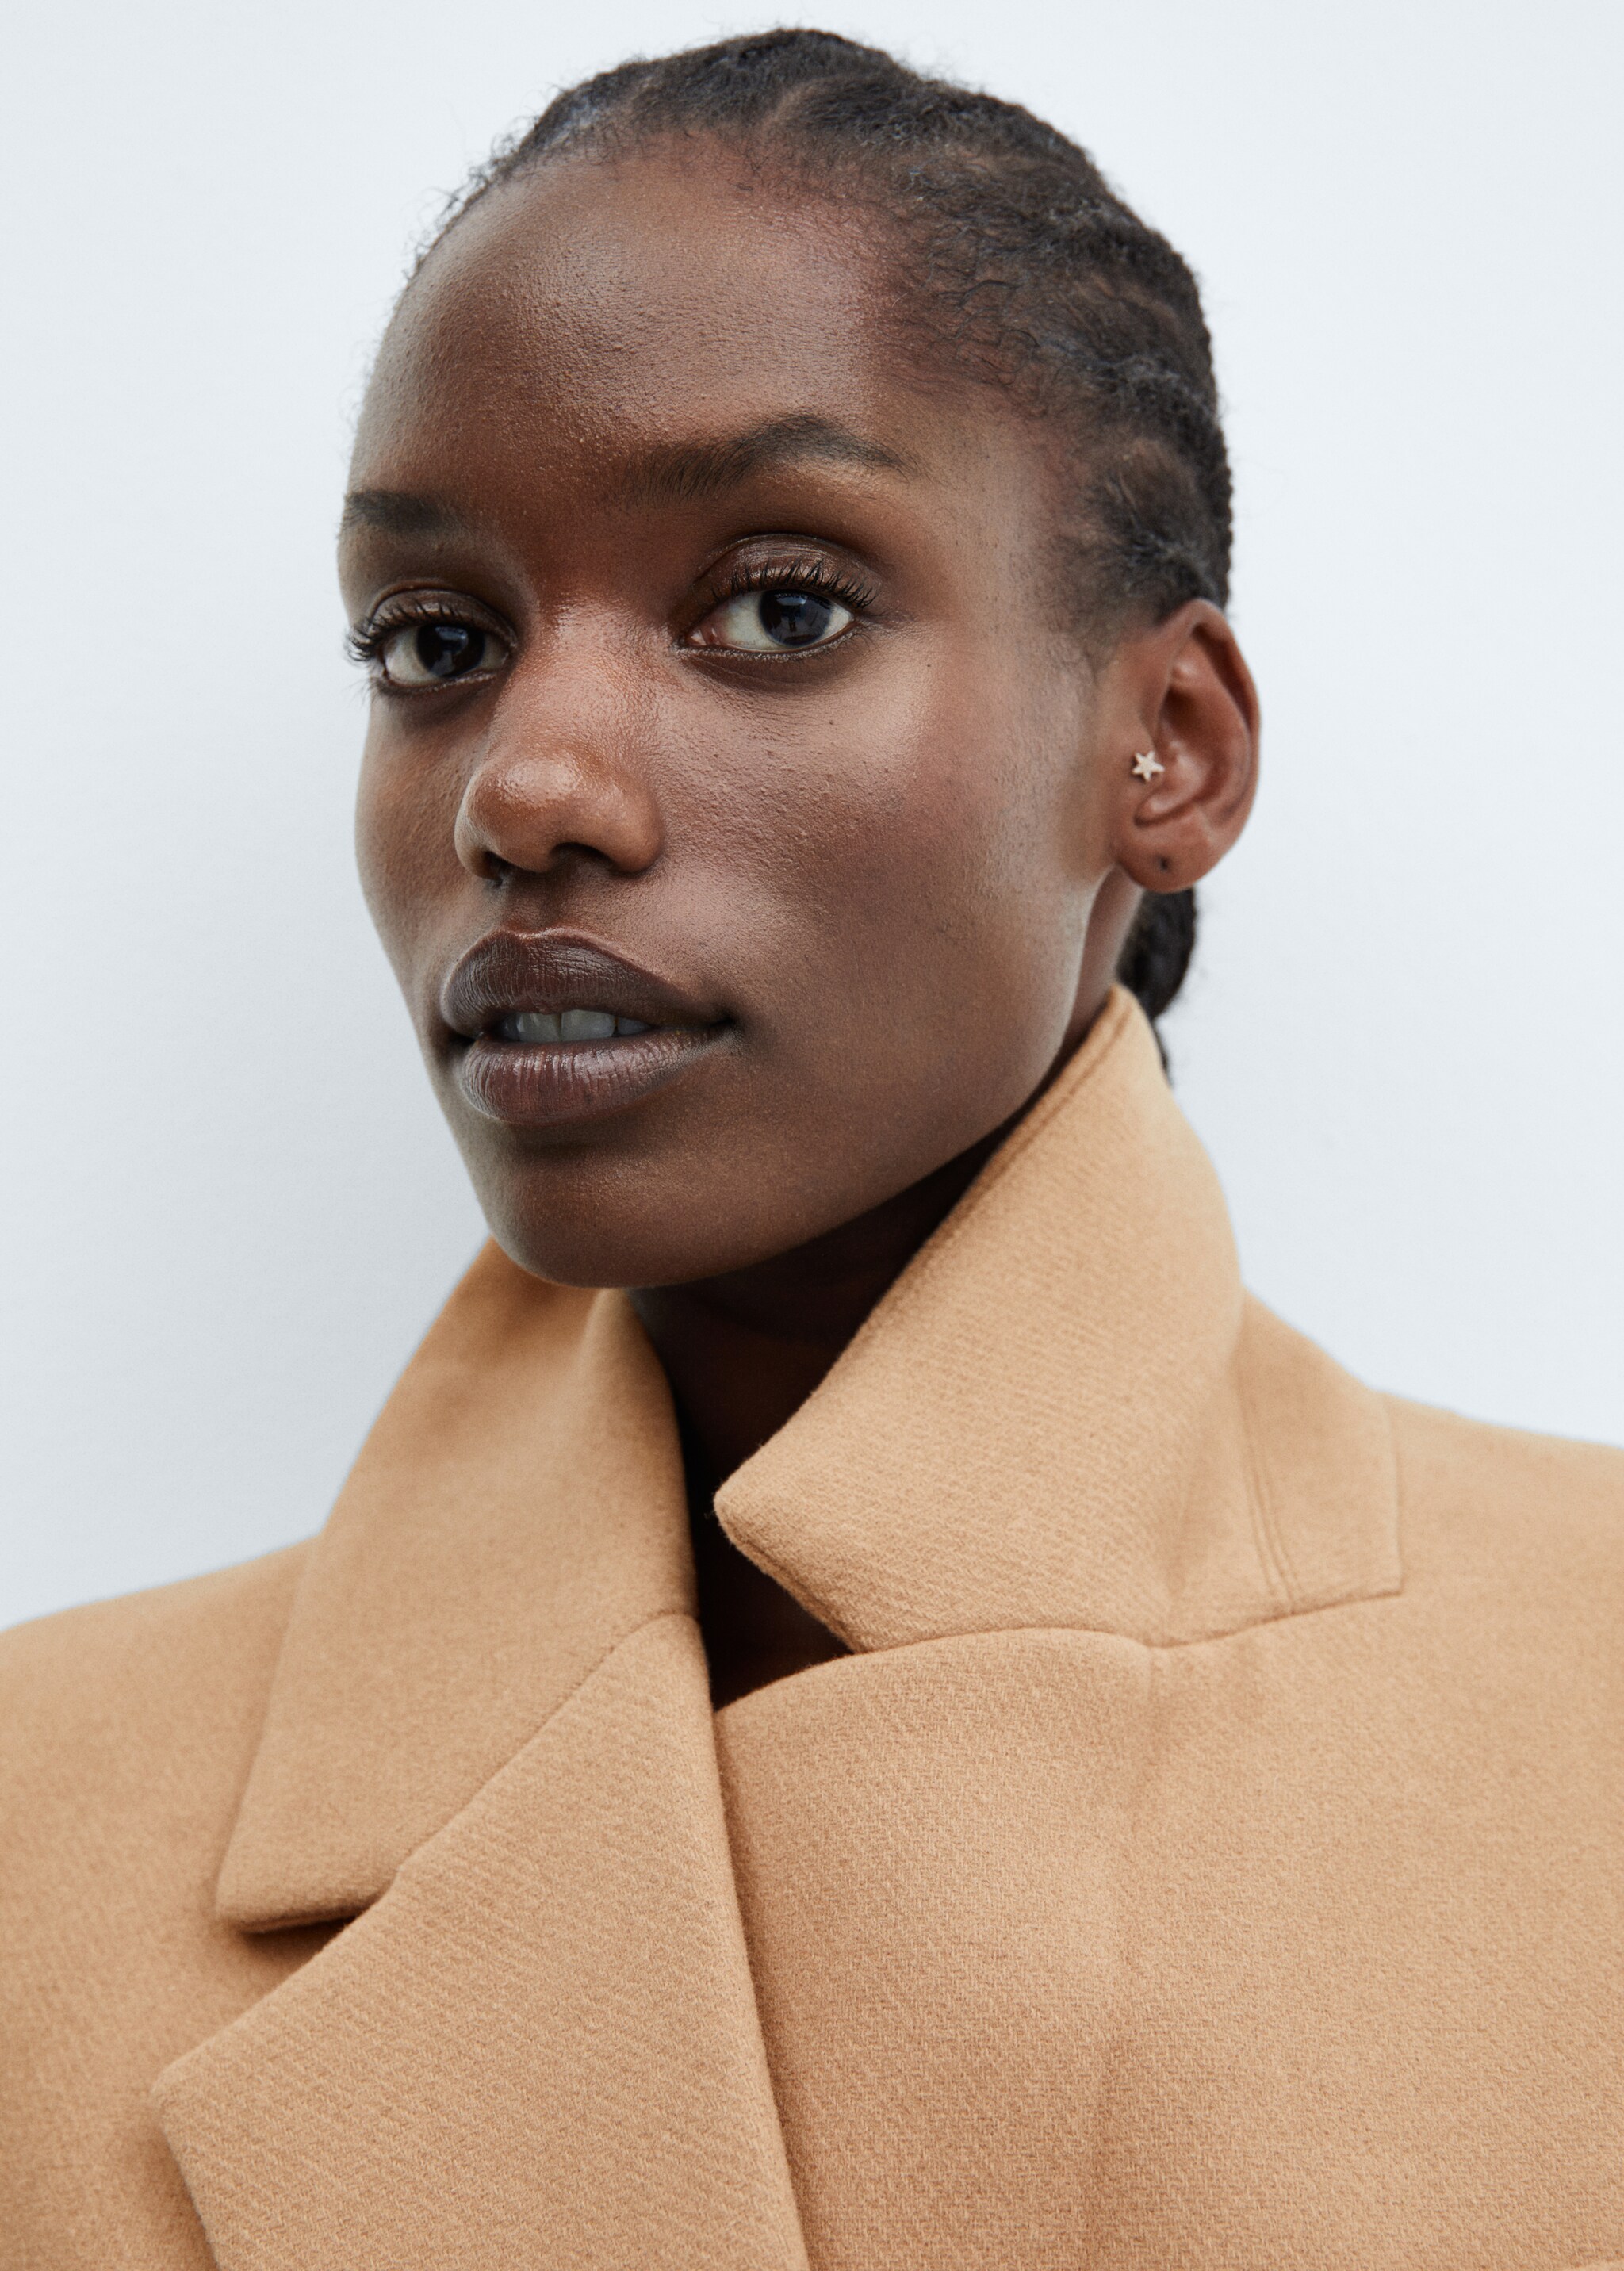 Tailored wool coat - Details of the article 4